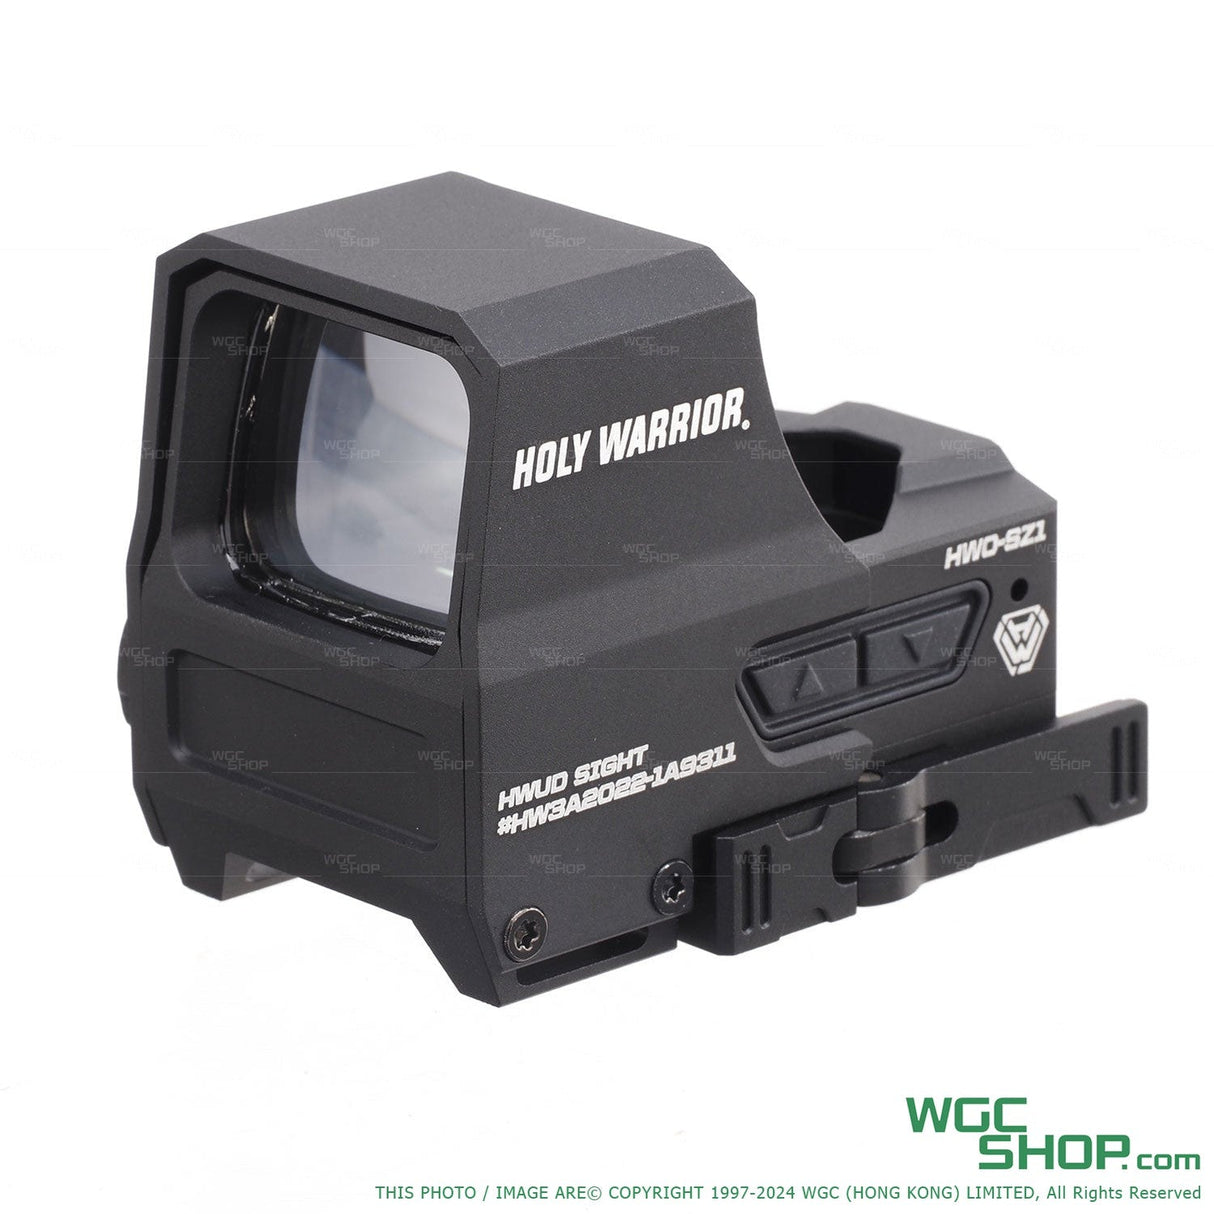 HWO SZ1 Electronic Sight ( for Airsoft Only )